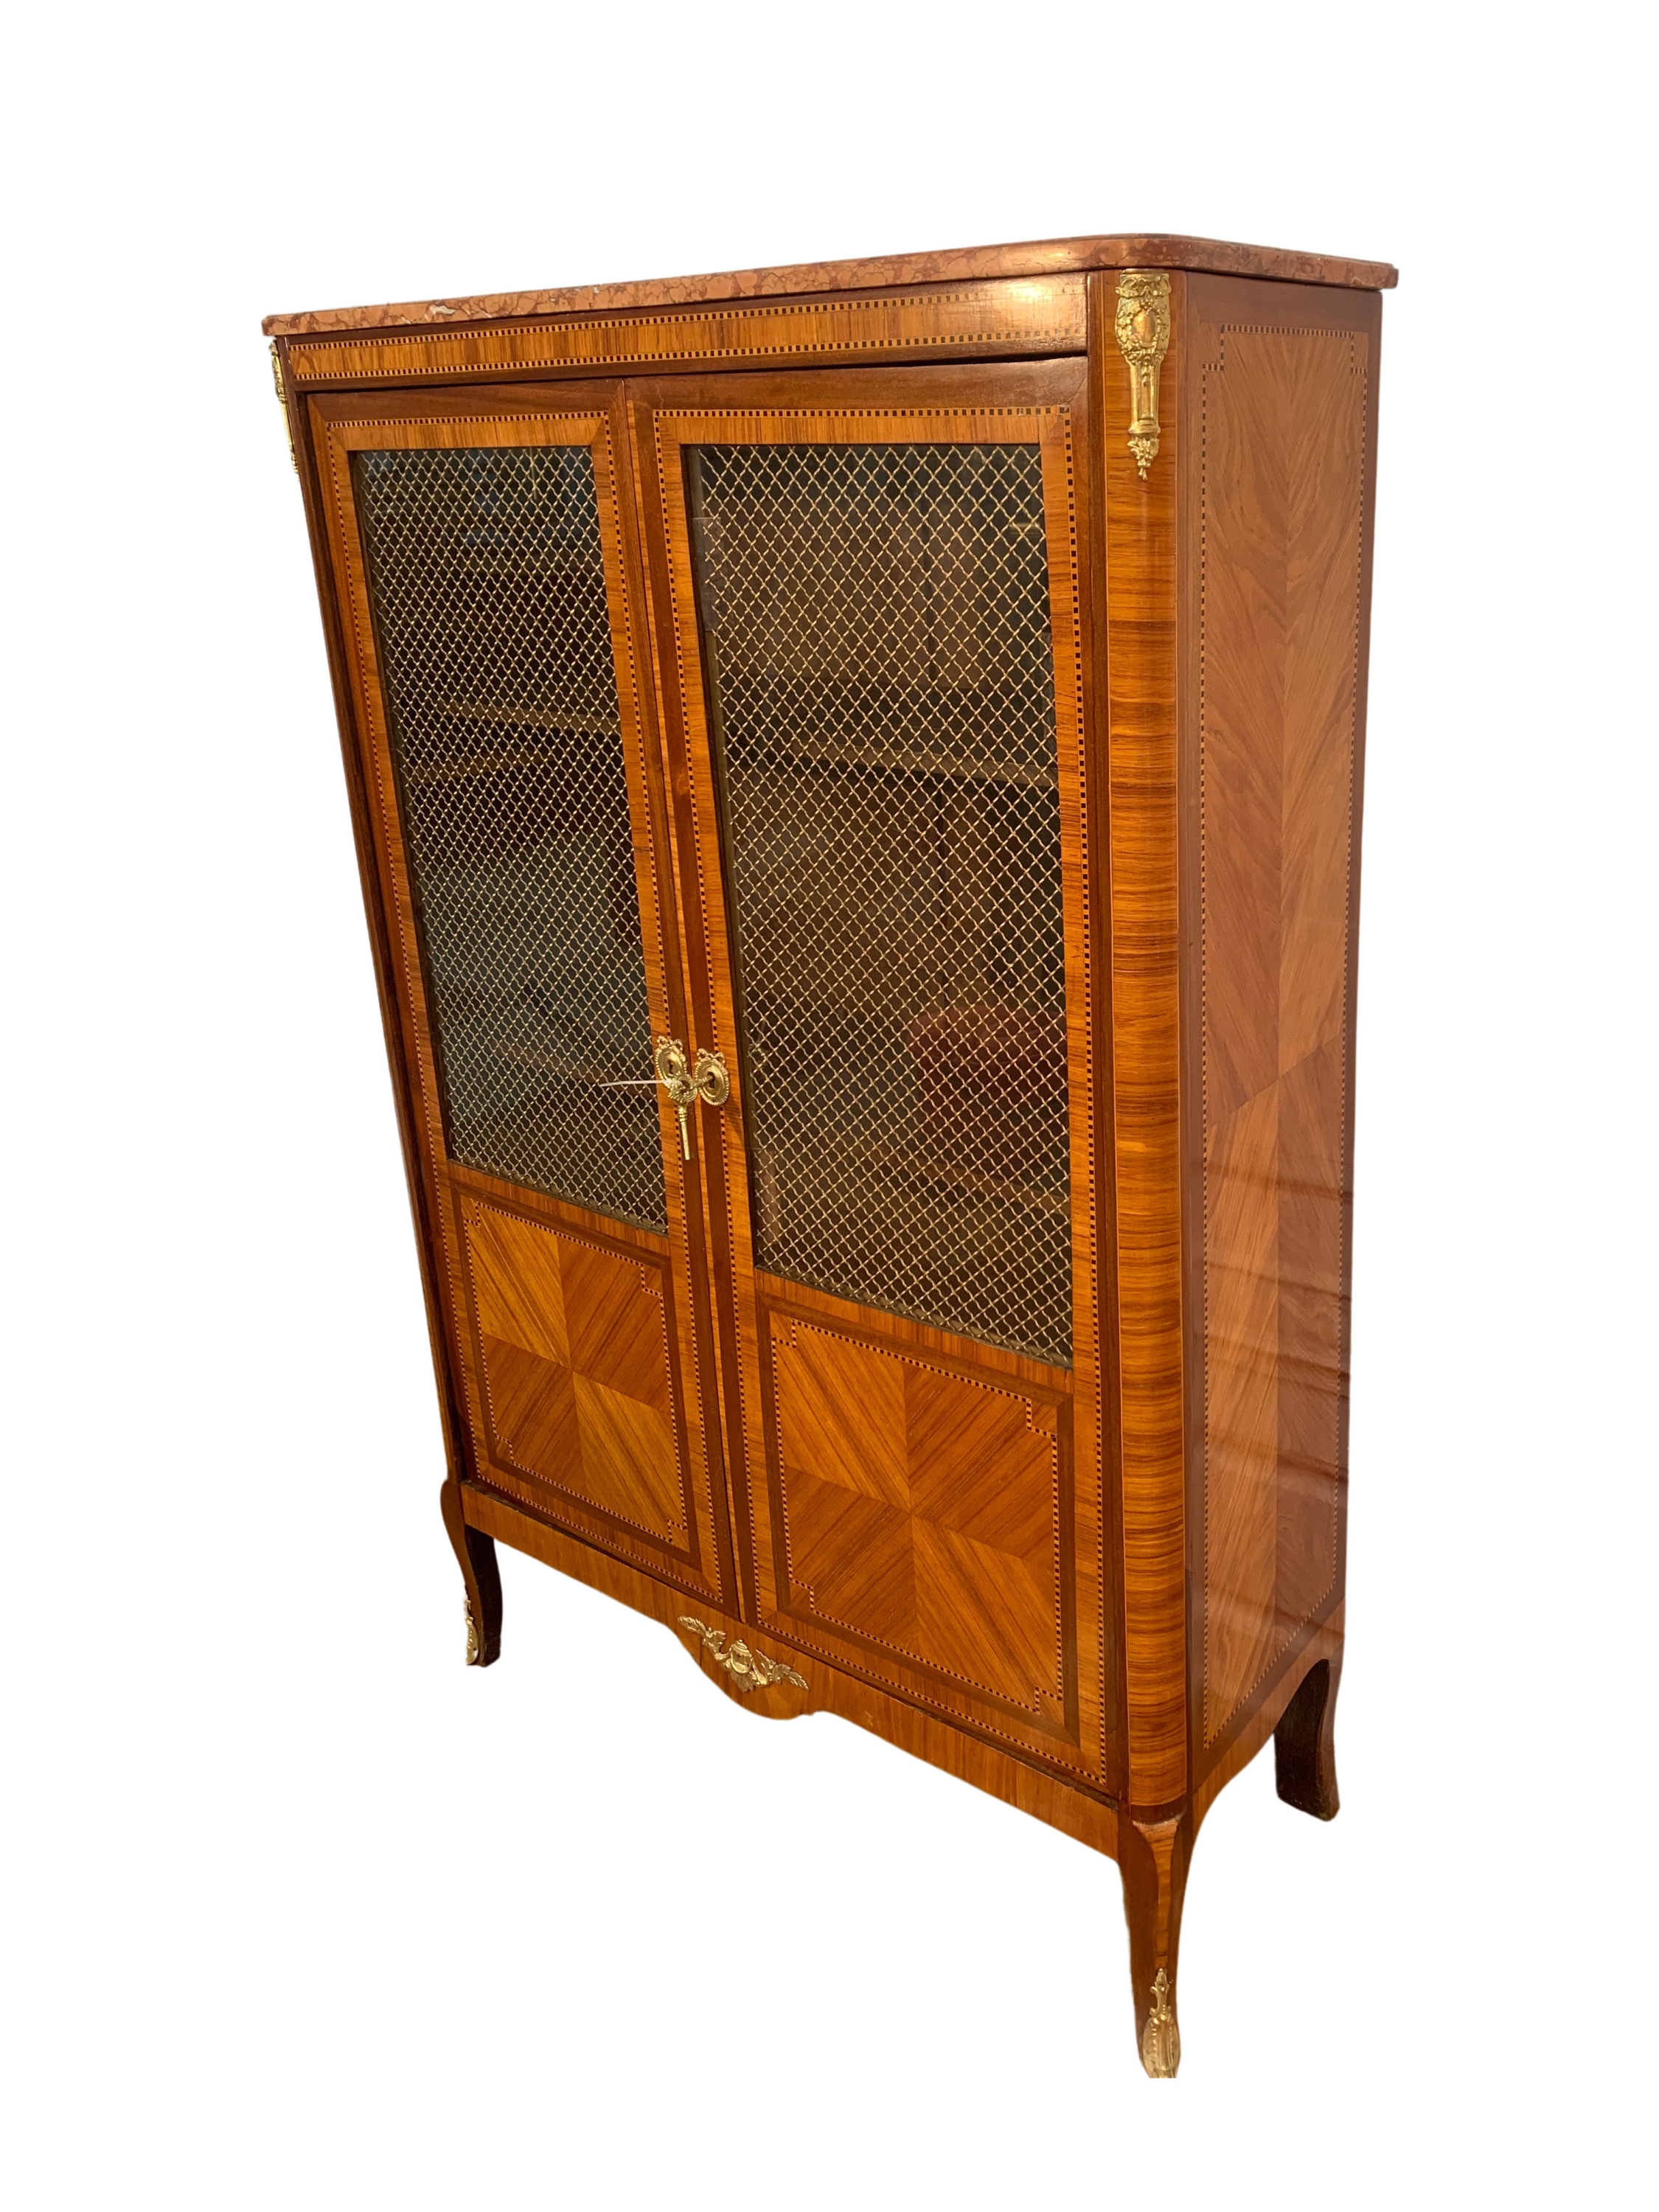 LOUIS XV STYLE INLAID M TOP CABINET 2f8c22